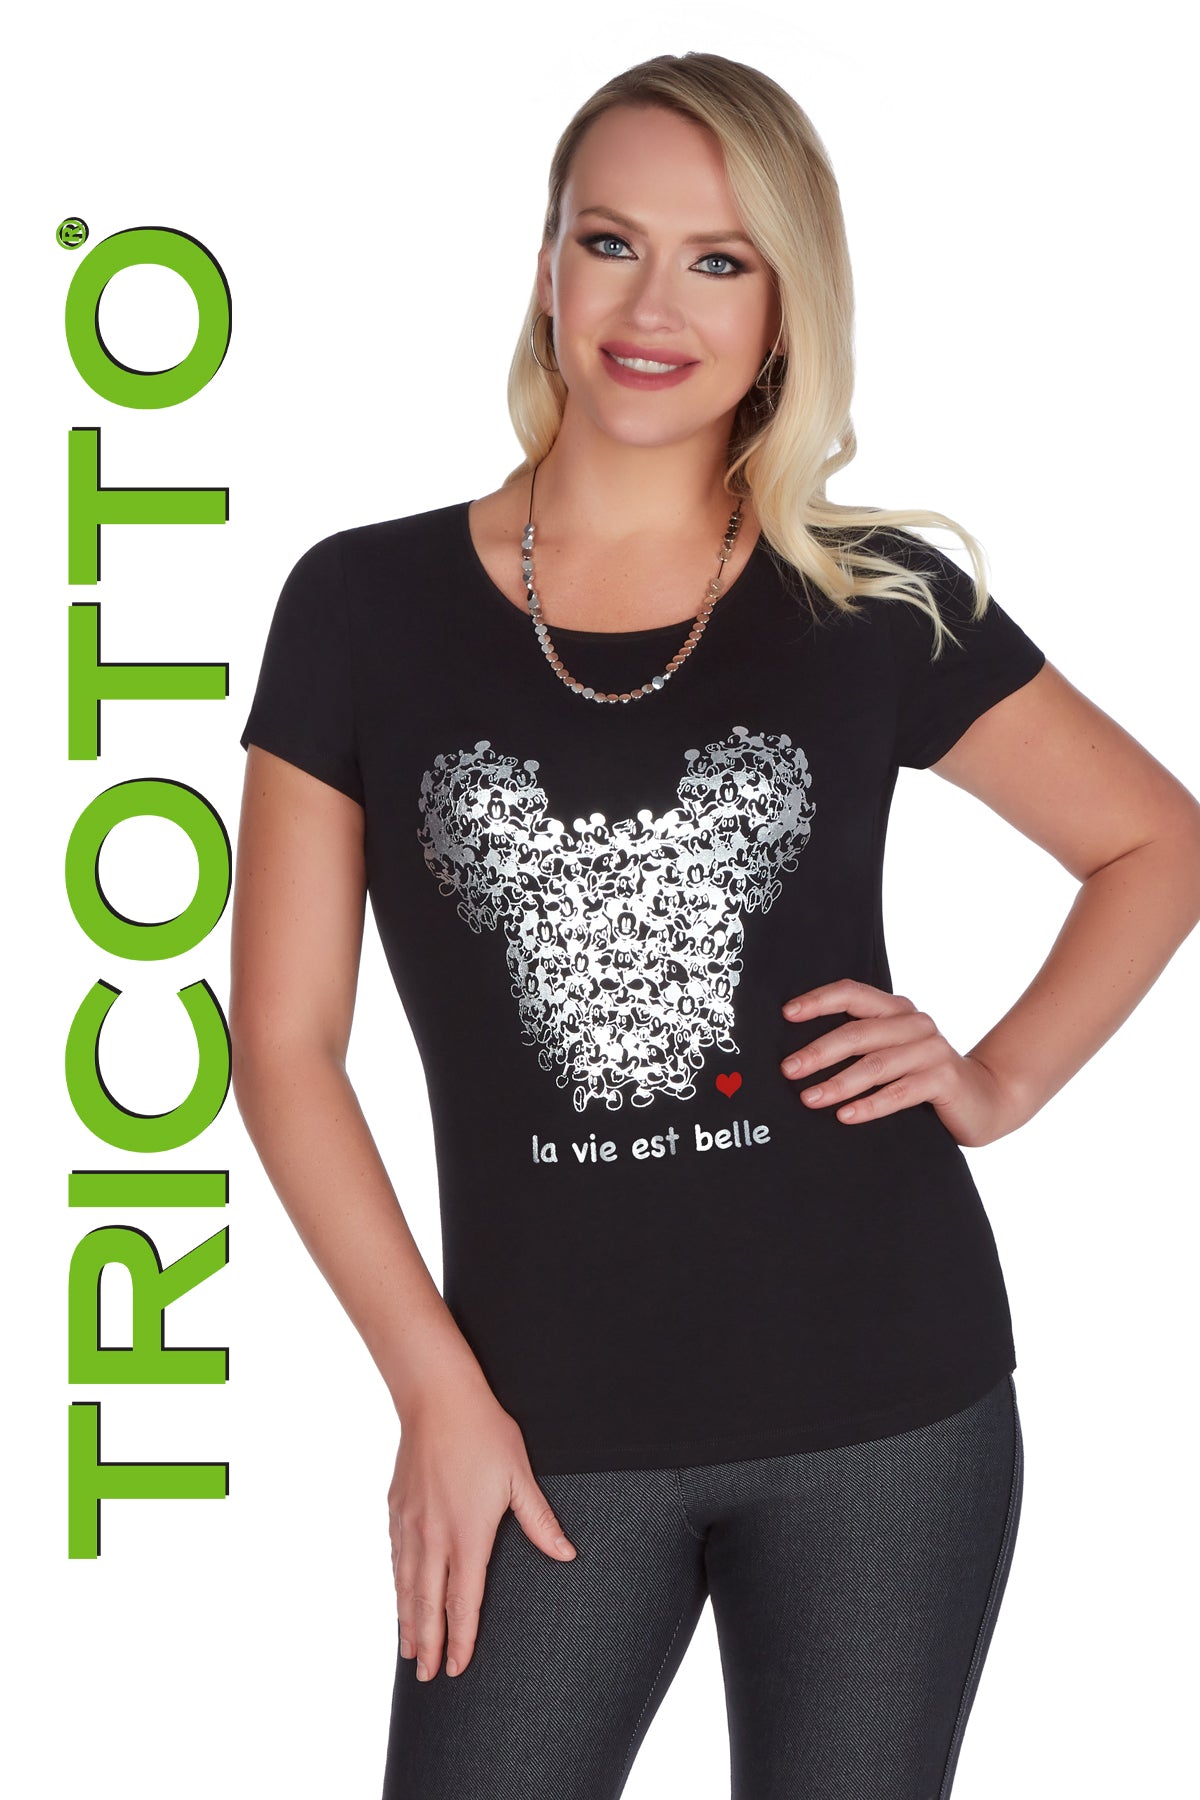 Tricotto T-shirts-Buy Tricotto T-shirts Online Canada-T-shirt shop-Tricotto Clothing Quebec-Tricotto Clothing Montreal-Jane & John Clothing